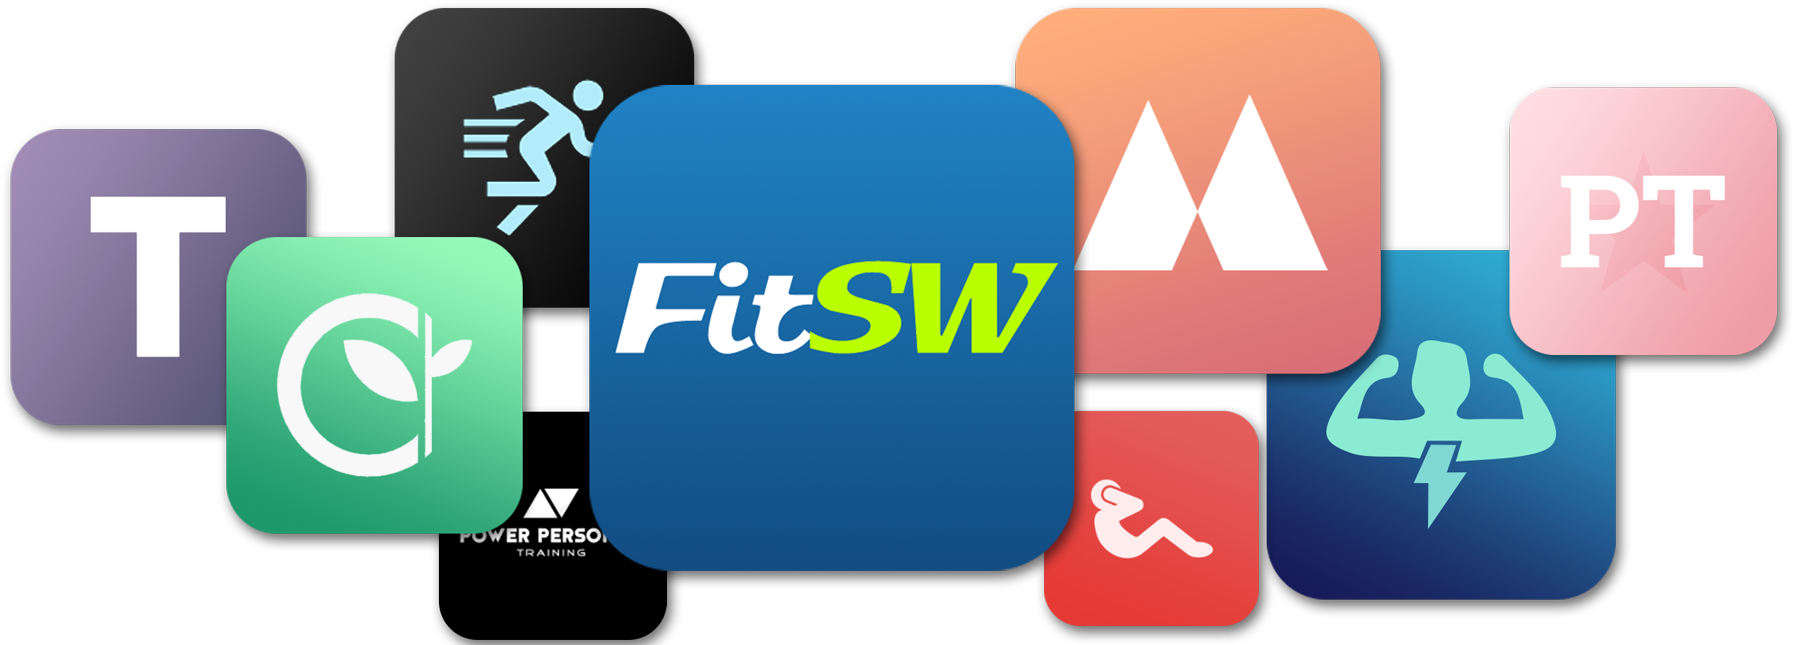 Personal Trainer Software Custom Branded Fitness App Graphic